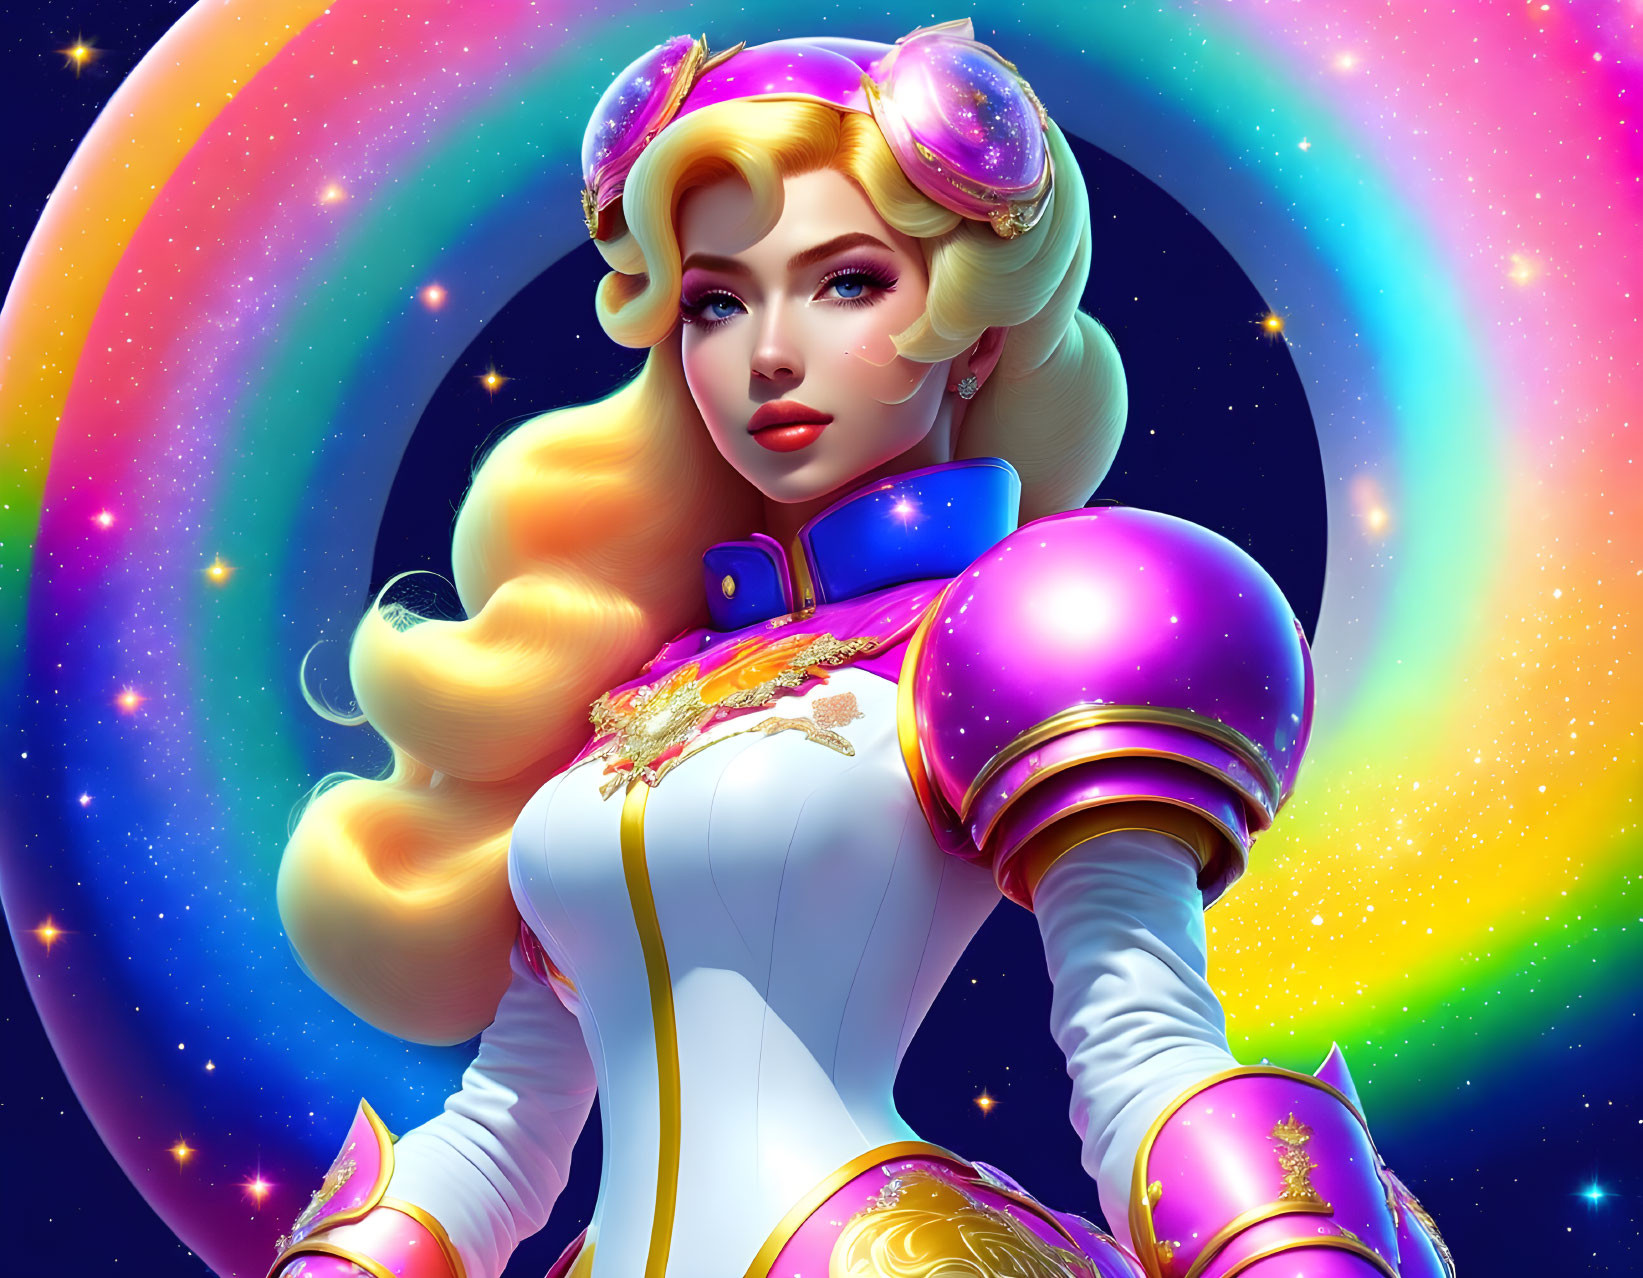 Vibrant animated female character in futuristic armor against cosmic rainbow background